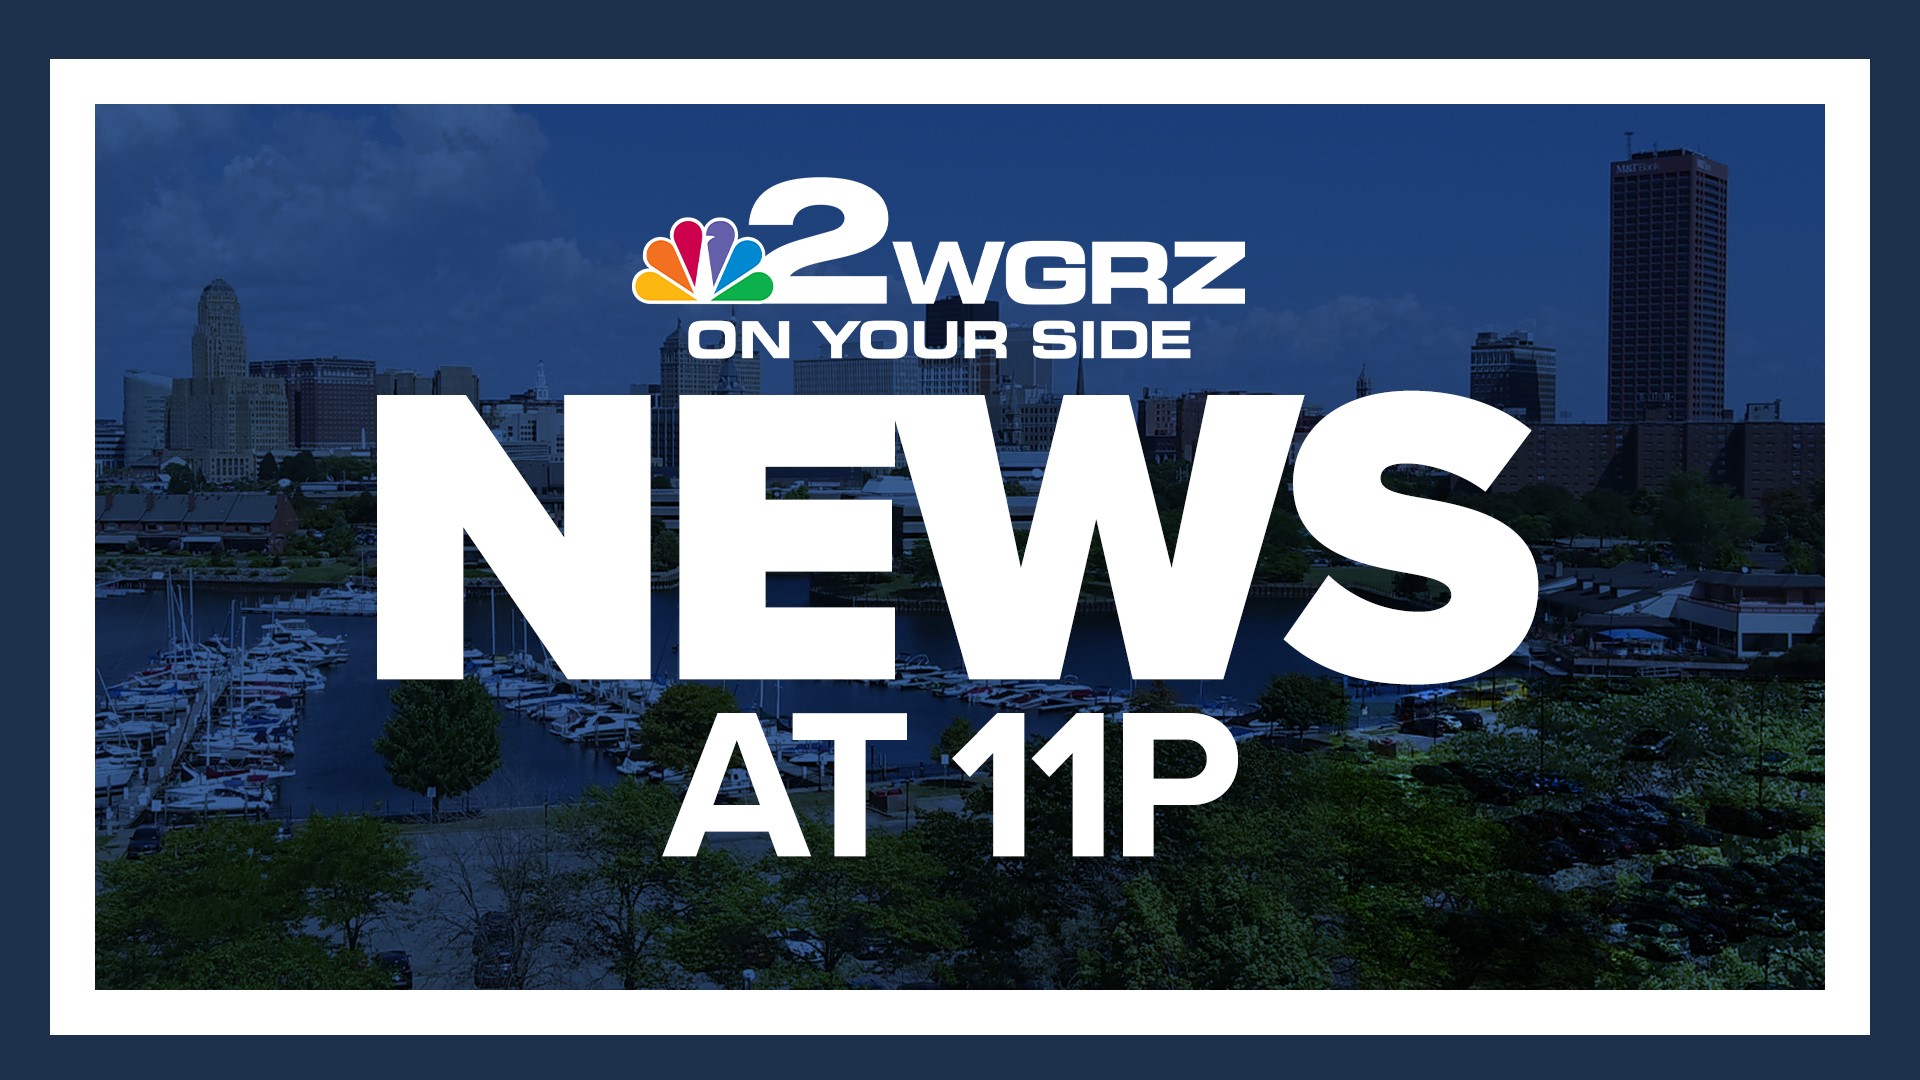 The Channel 2 Weekend News Team presents a report of local and national news events, along with the latest weather forecast and sports updates.